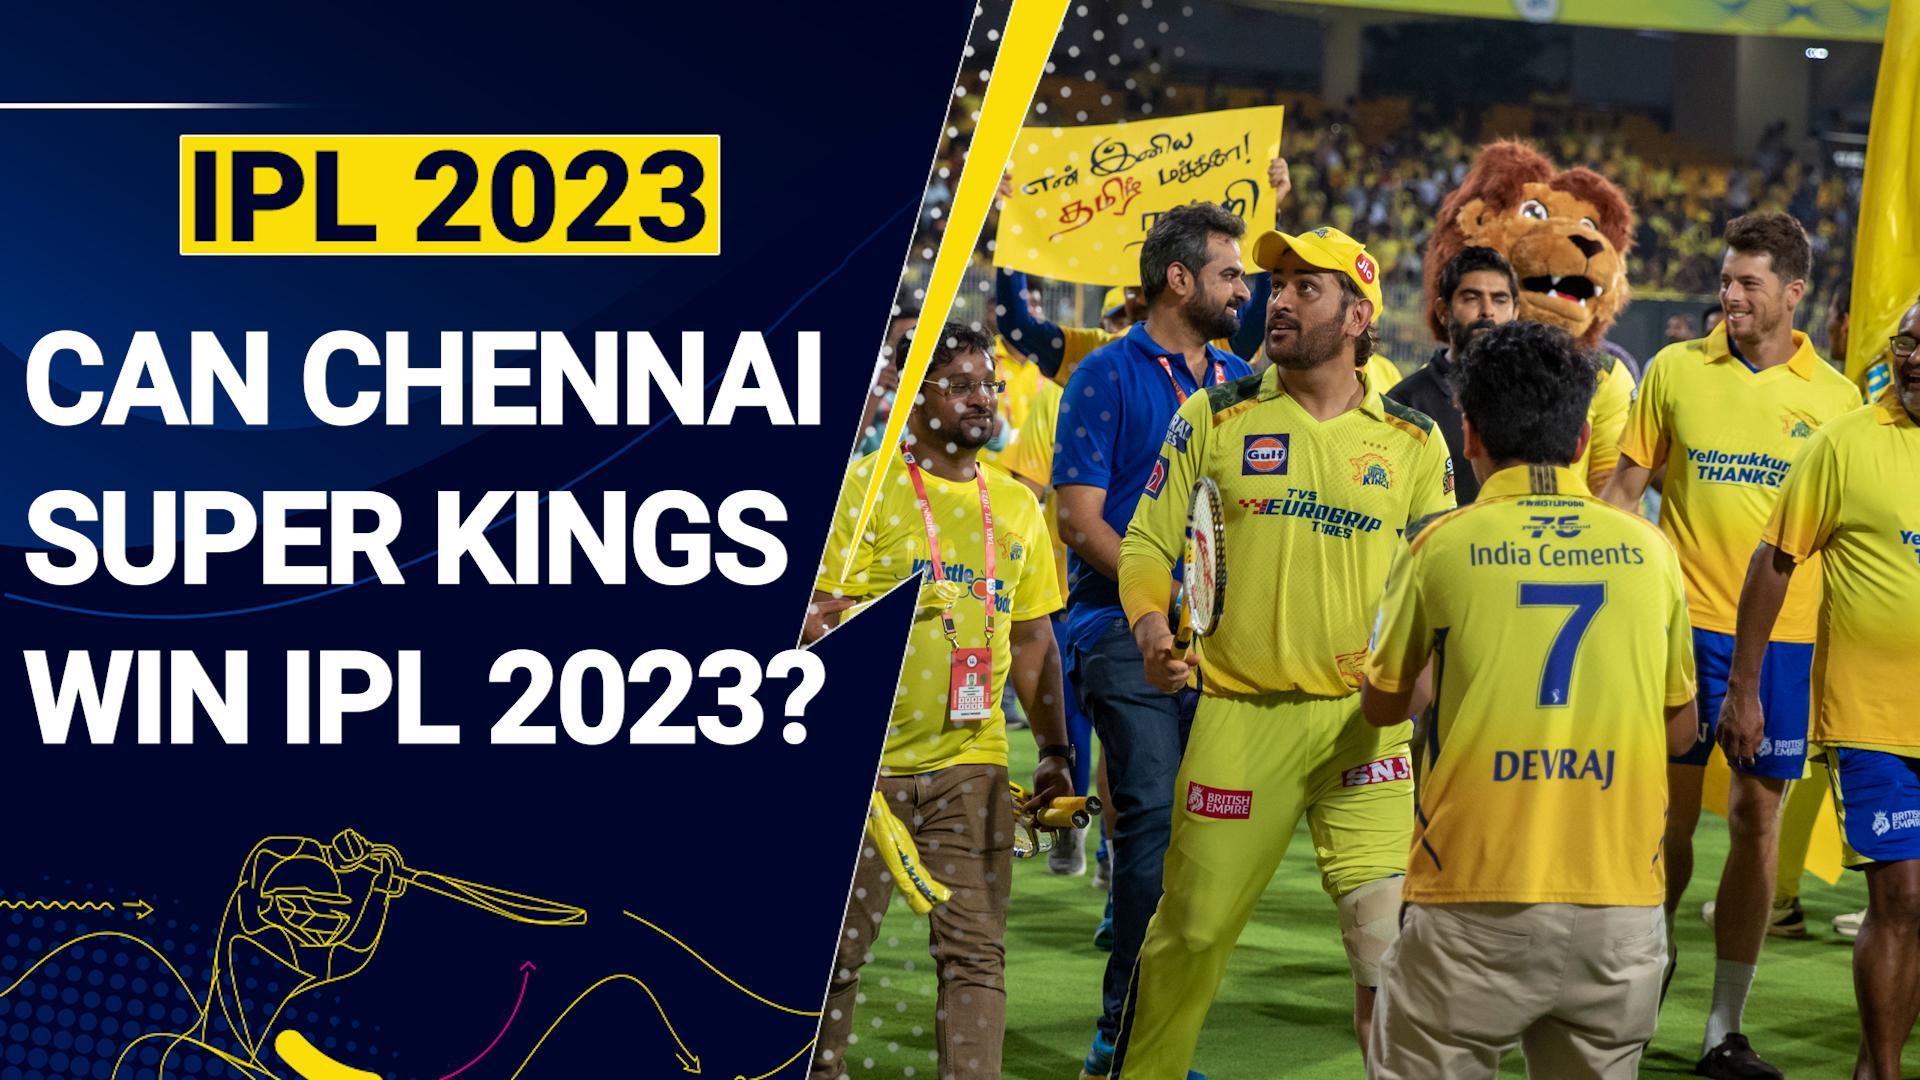 Can These Two Superstar Cricketers Lead Chennai Super Kings To Another IPL Win In 2023?